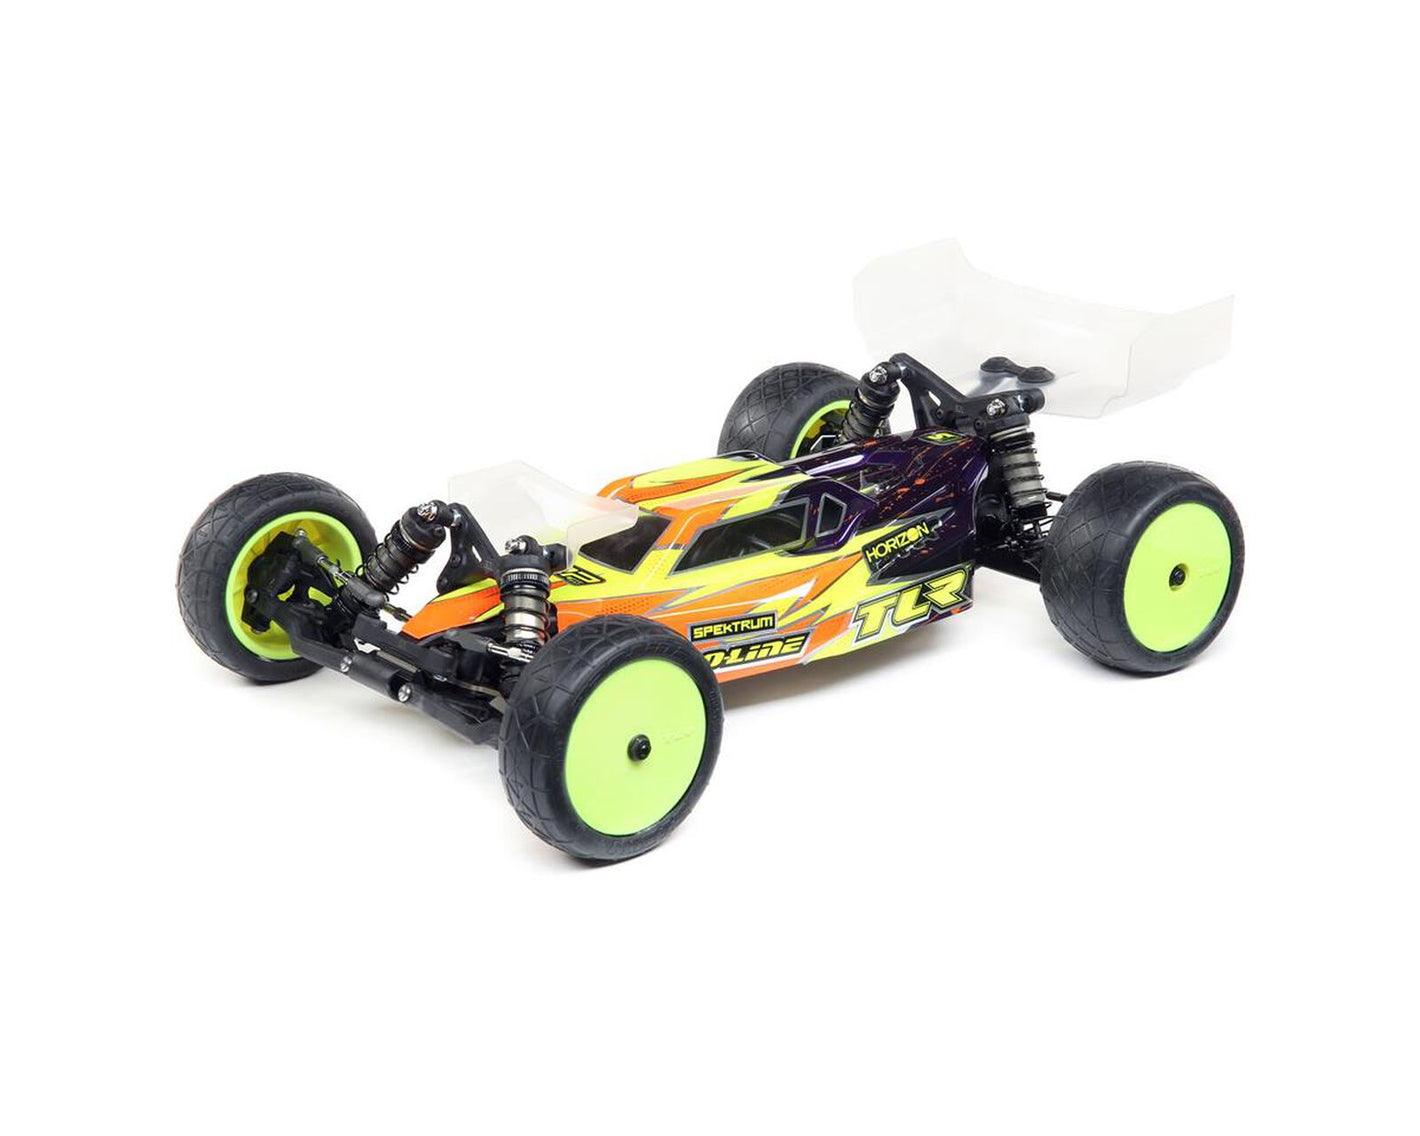 1/10 22 5.0 DC Race Roller 2WD Buggy, Dirt/Clay